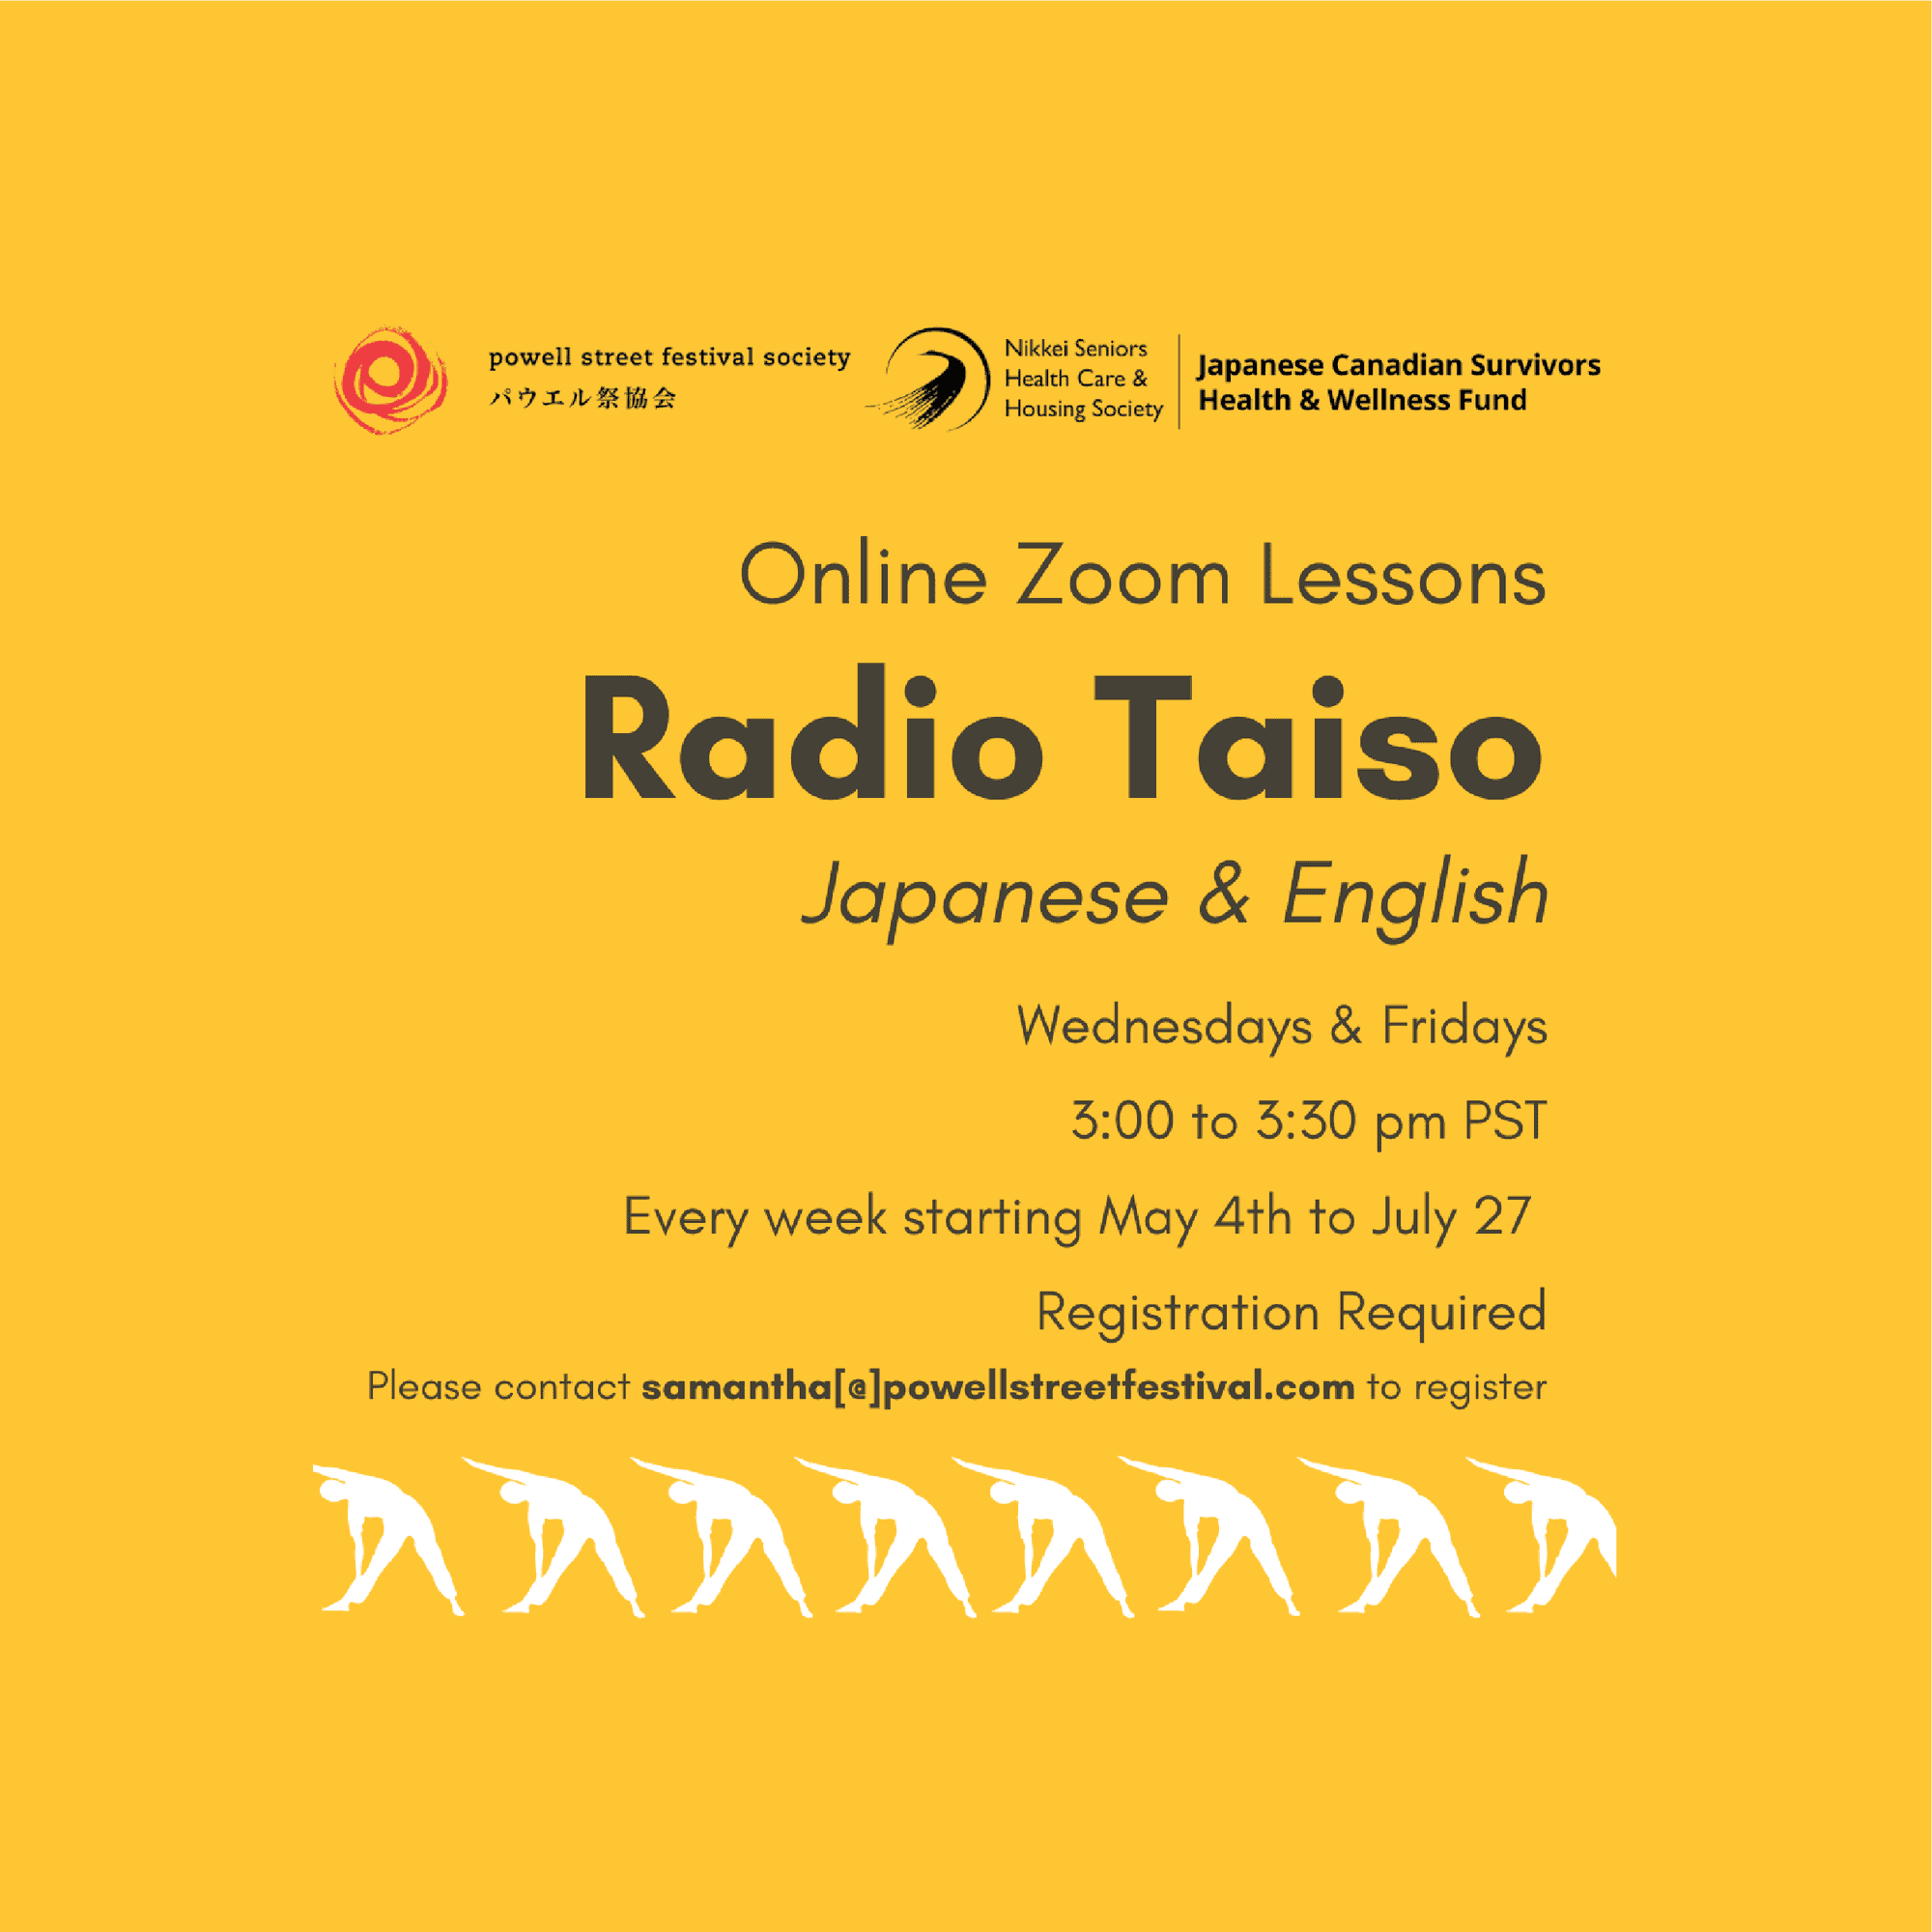 square poster with silhouette of exercising people. with text reading "Online Zoom Lessons / Radio Taiso / Japanese & English / Wednesdays & Fridays 3:00 to 3:30 Pm PST / Every week starting May 4th to July 27 / Registration Required"